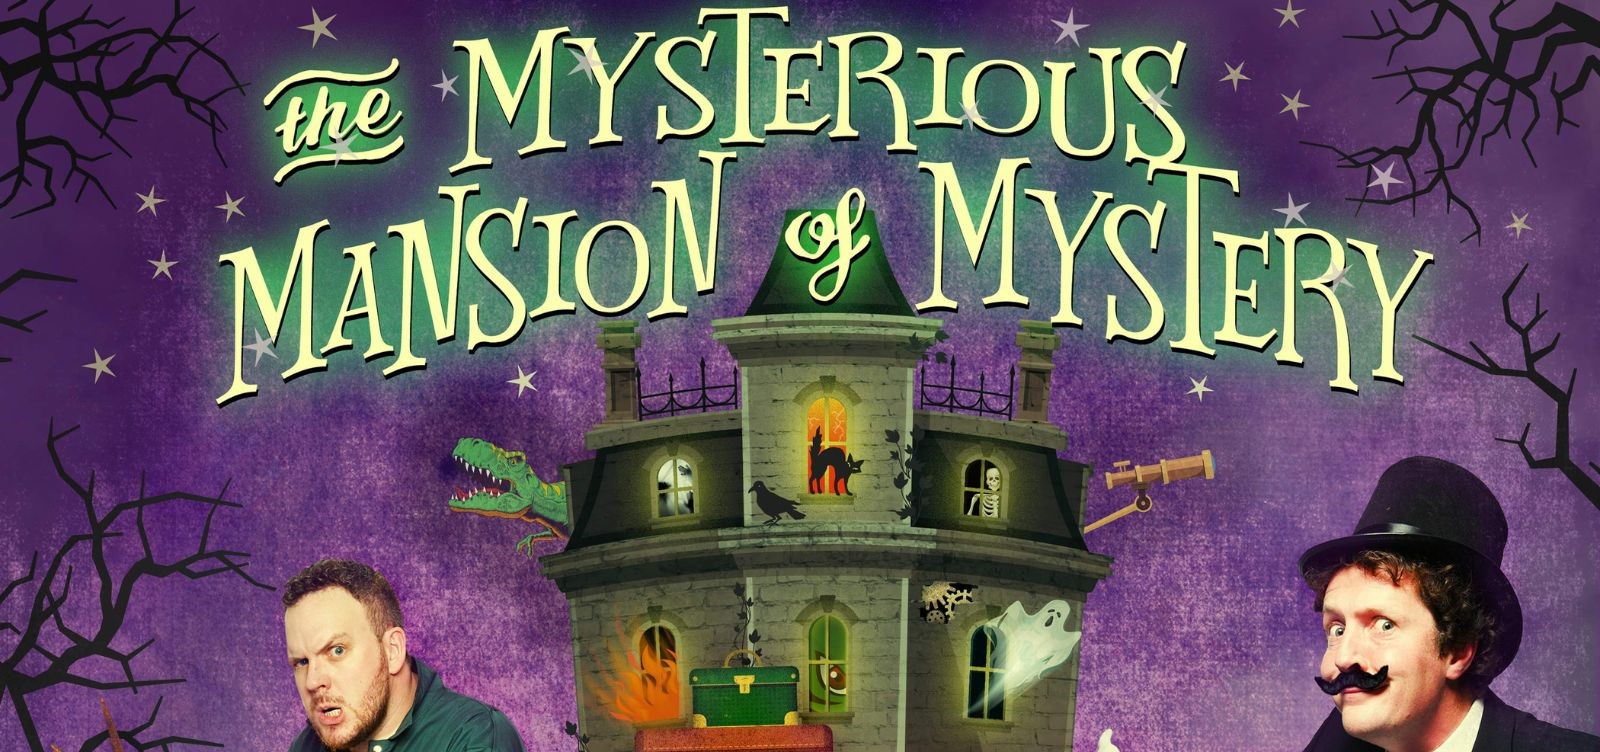 A poster with green letters and a purple background featuring a haunted mansion and three men dressed up as different characters including a cook, magician and gardener.